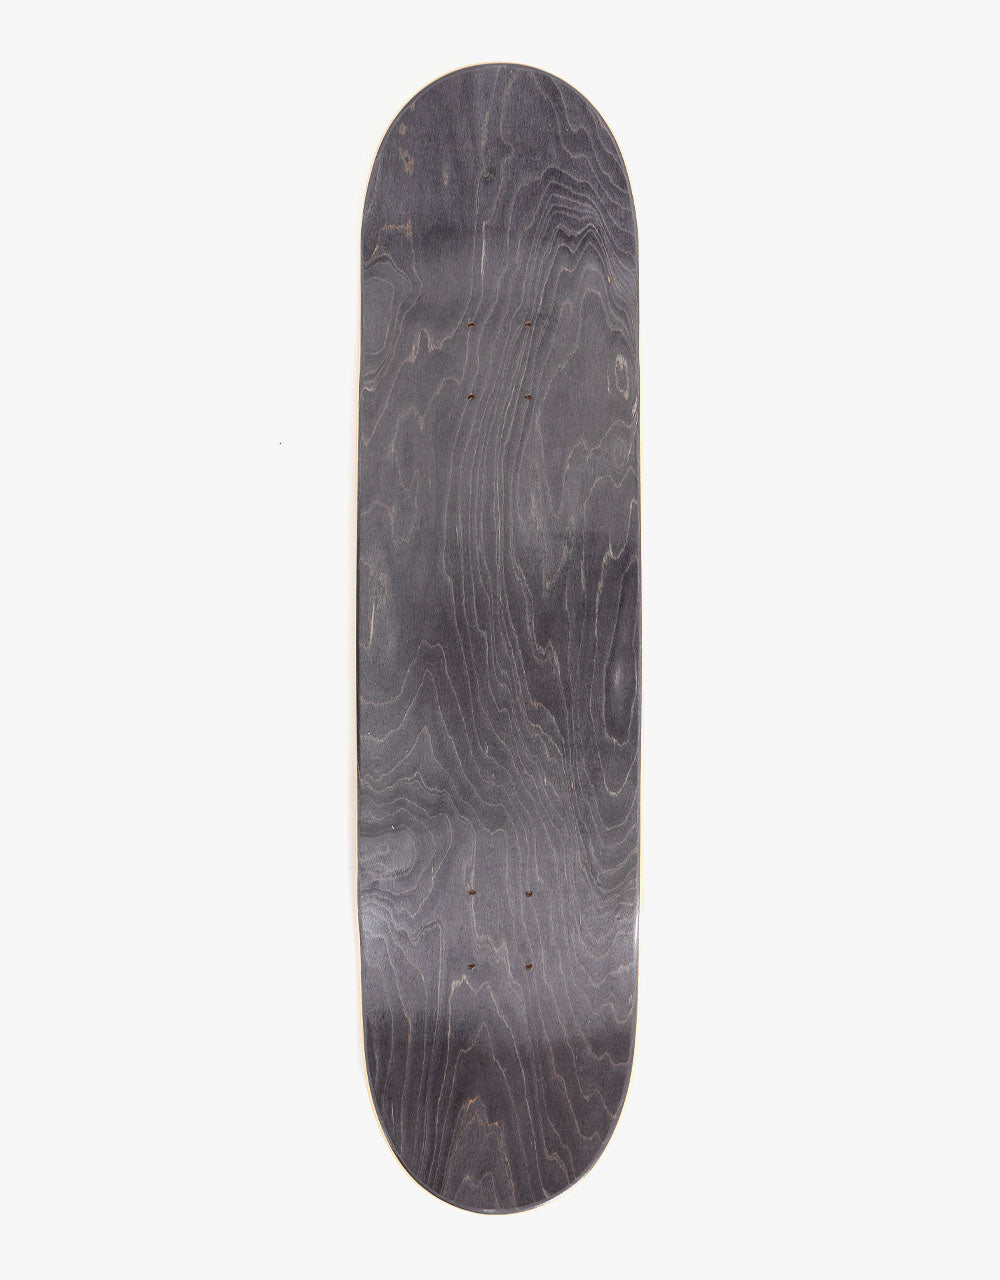 Route One 'What The' 'OG Shape' Skateboard Deck - 7.875"